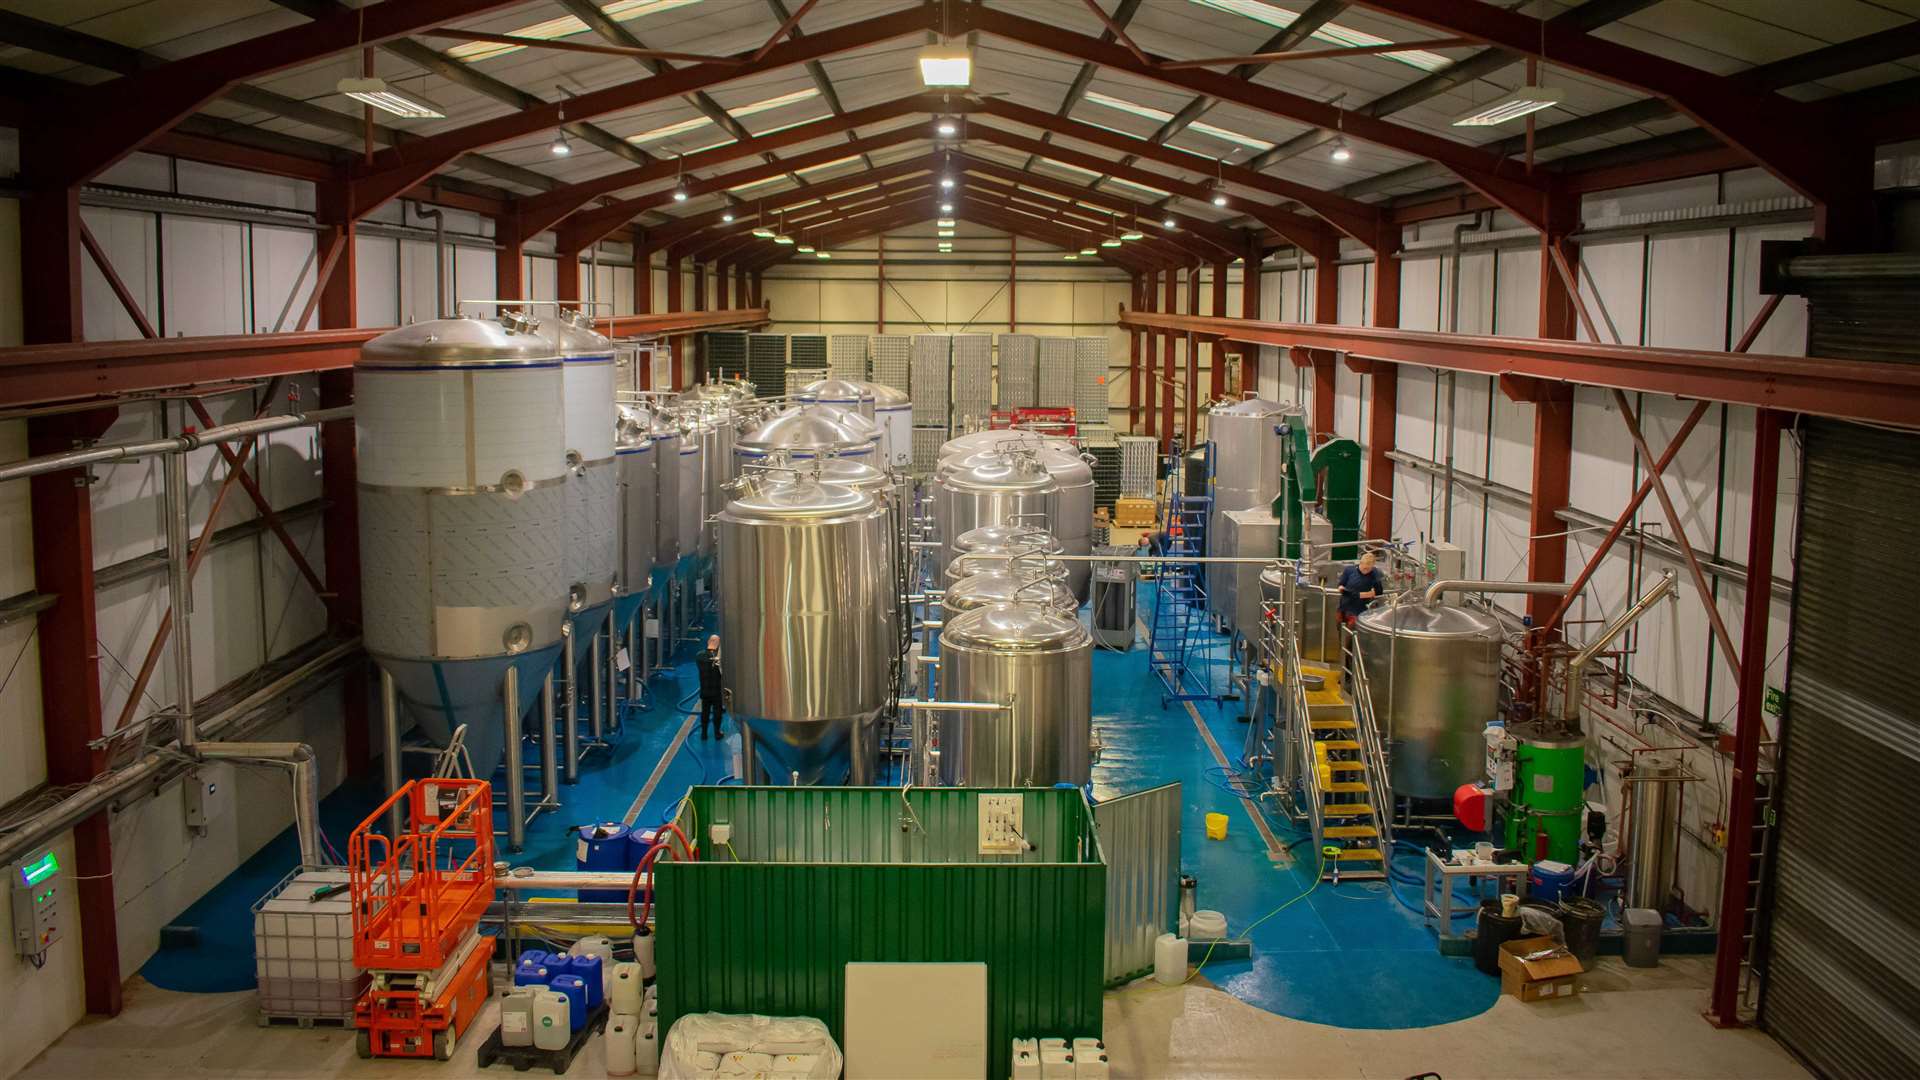 The funding will allow Fierce Beer to expand.